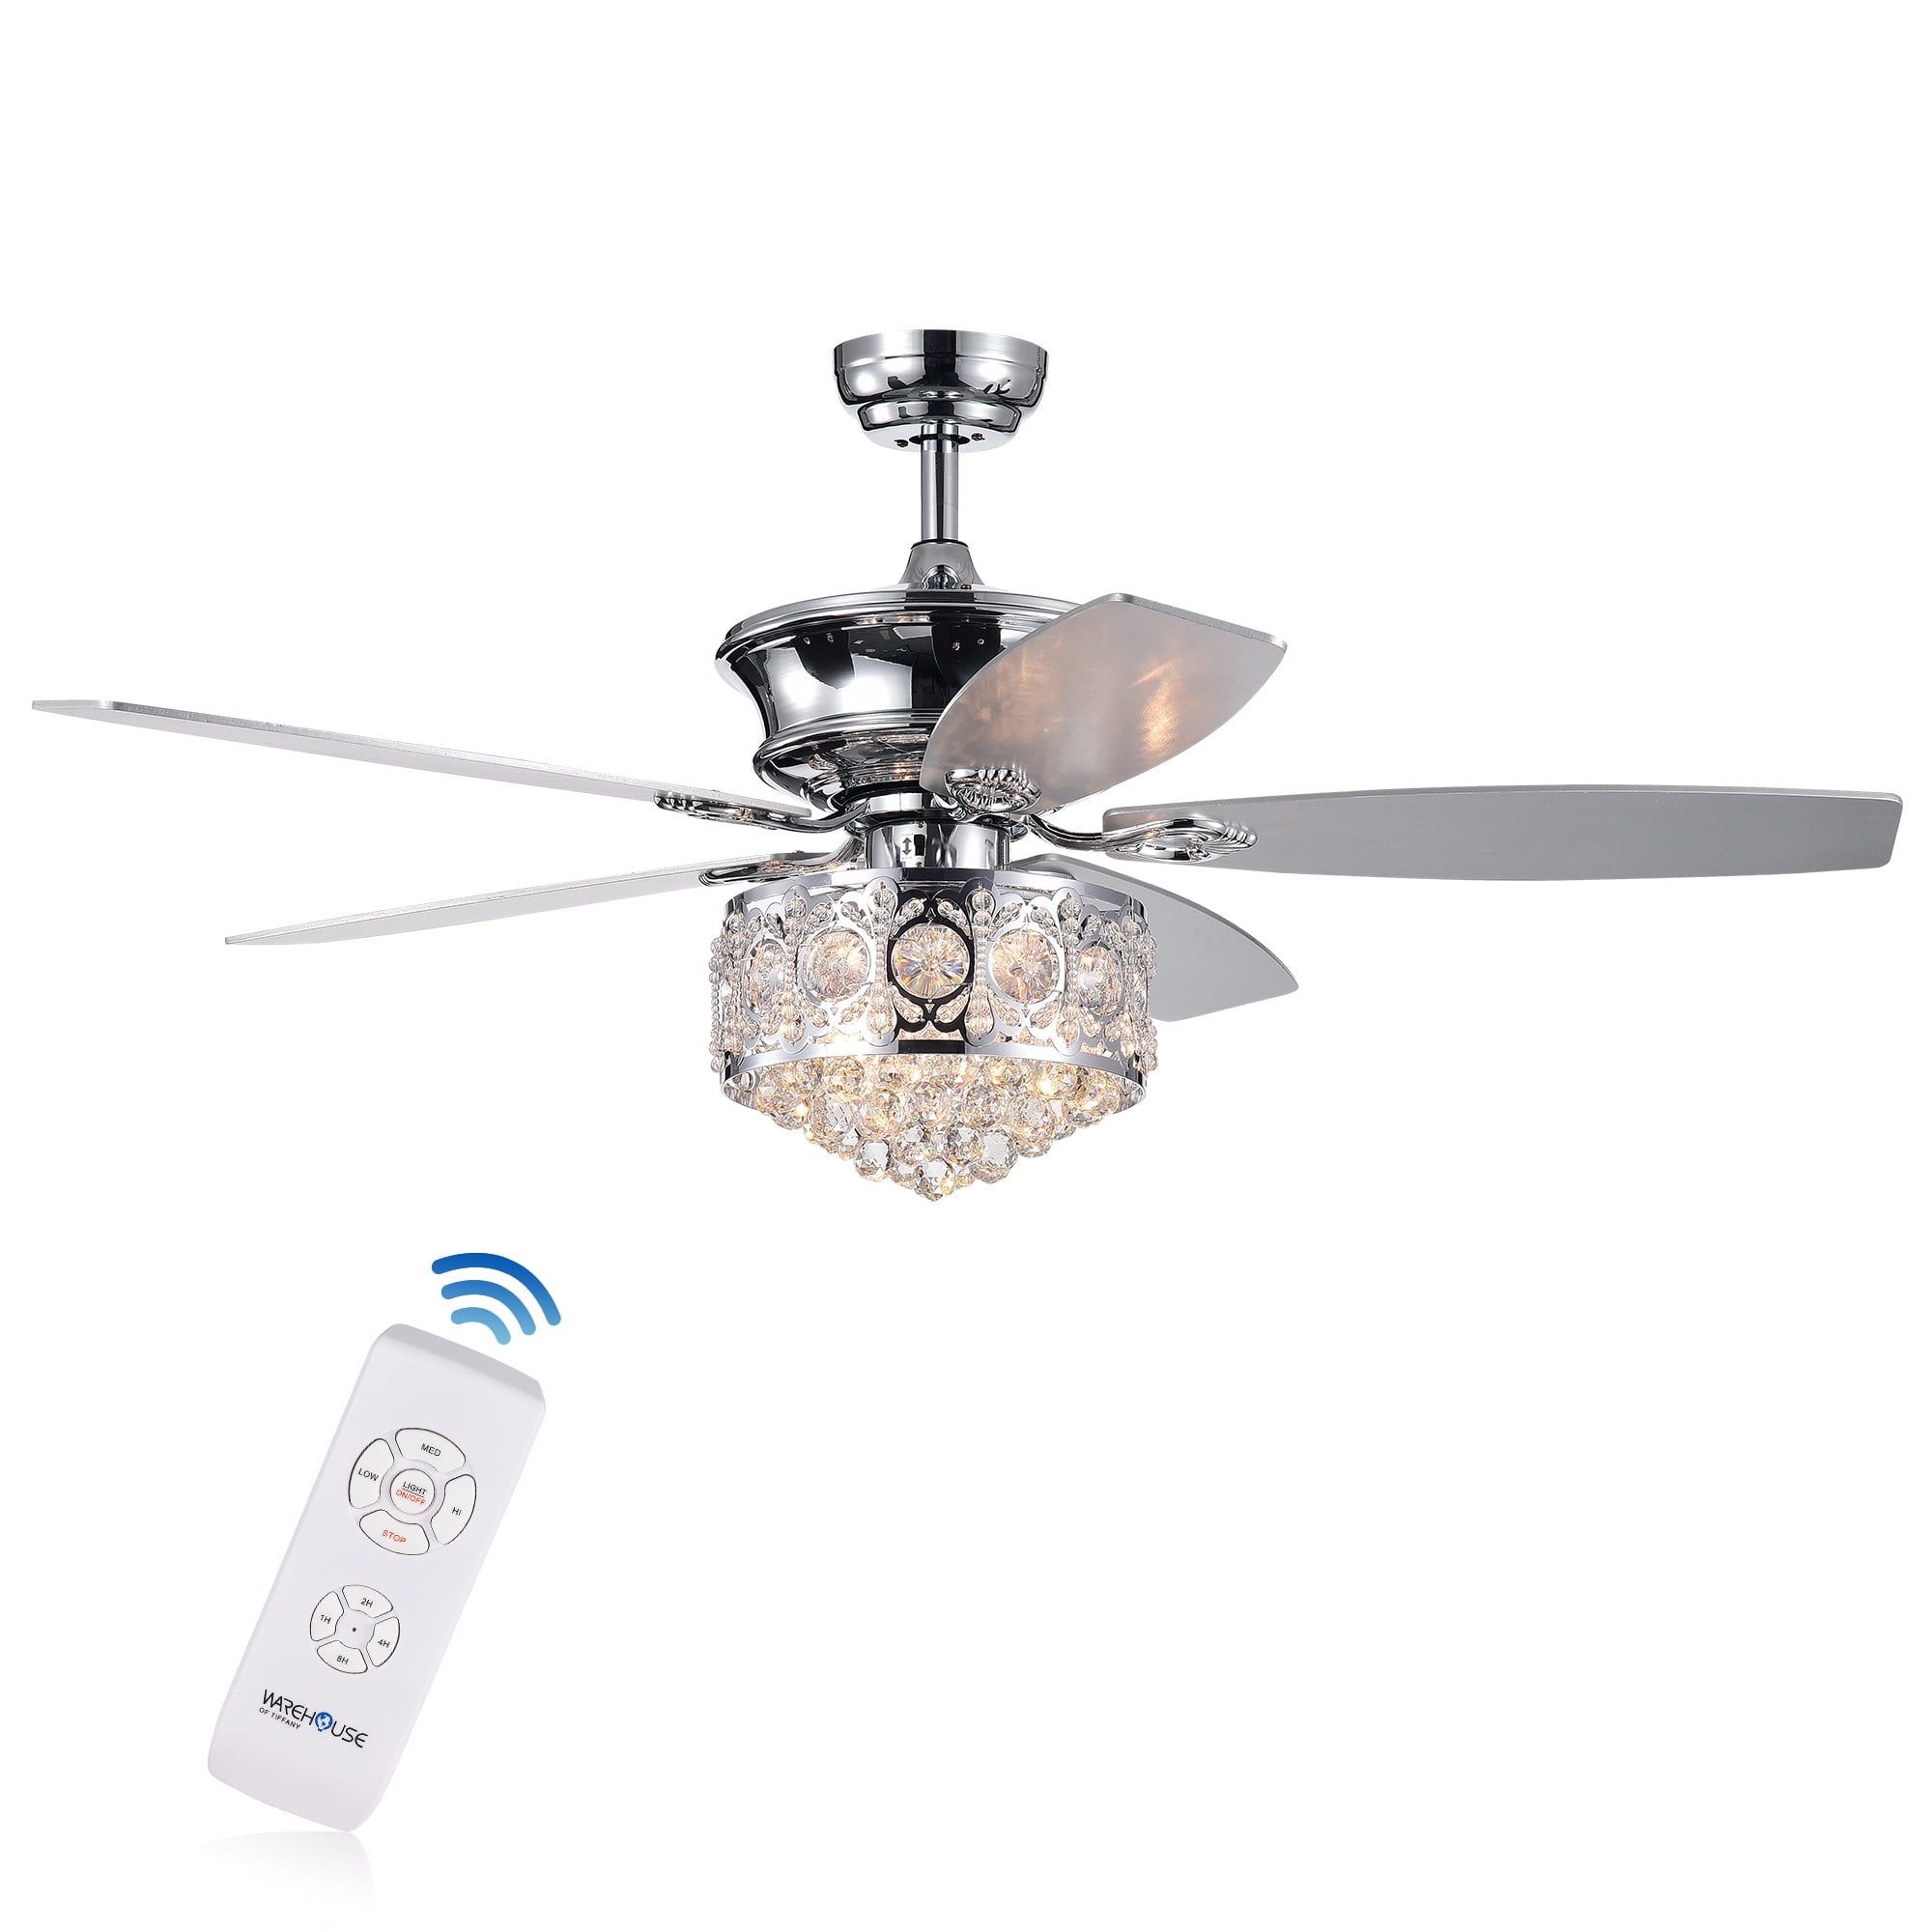 Hasna 52-inch Chrome & Crystal Lighted Ceiling Fan Optional Remote Control (Incl 2 Color Option Blades)